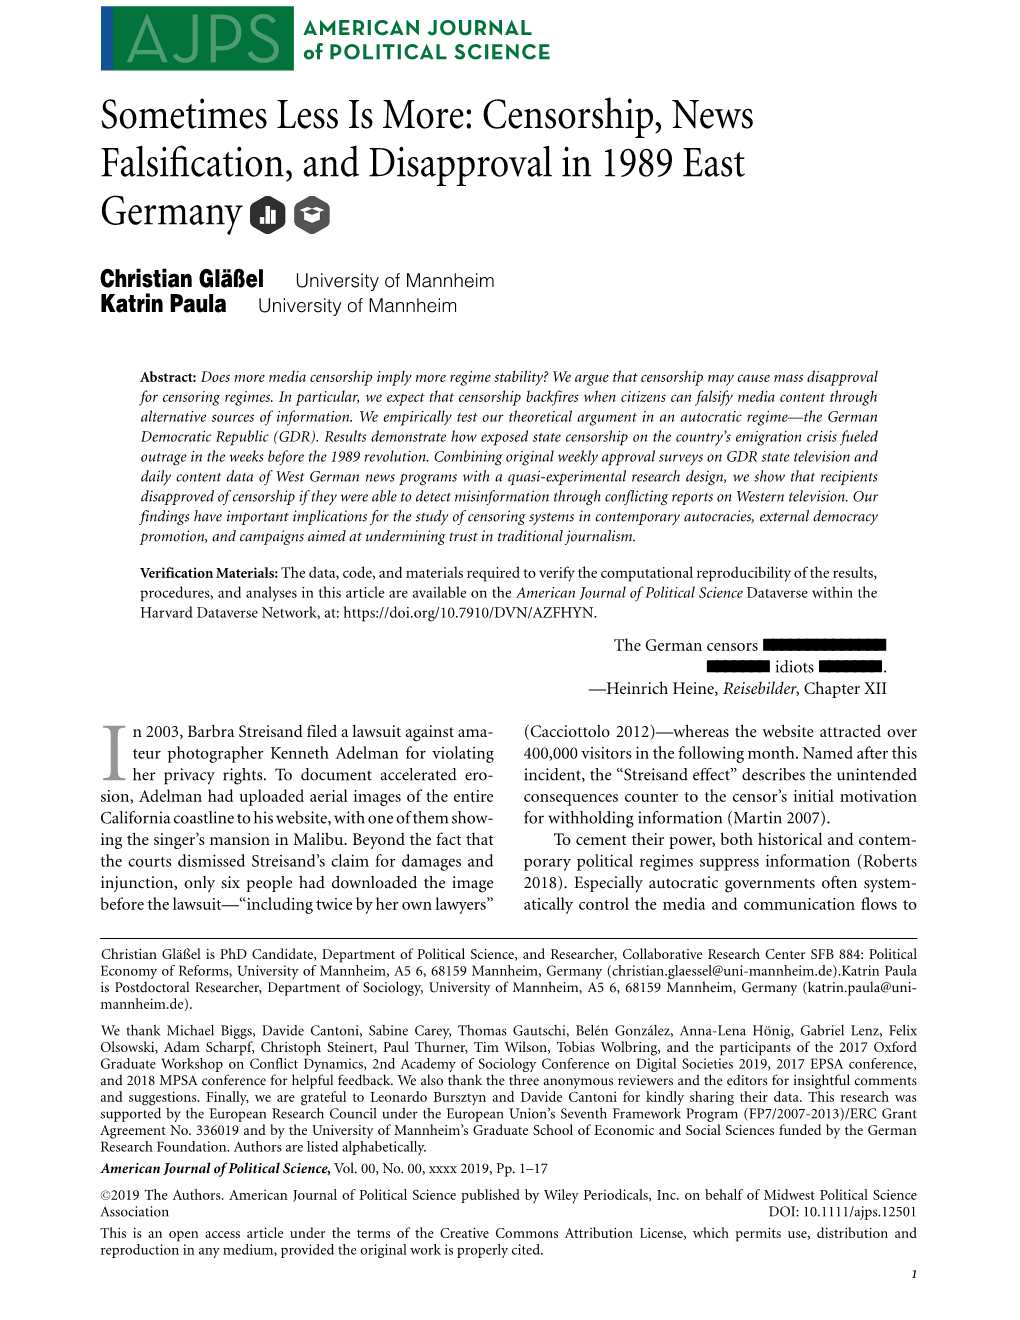 Censorship, News Falsification, and Disapproval in 1989 East Germany